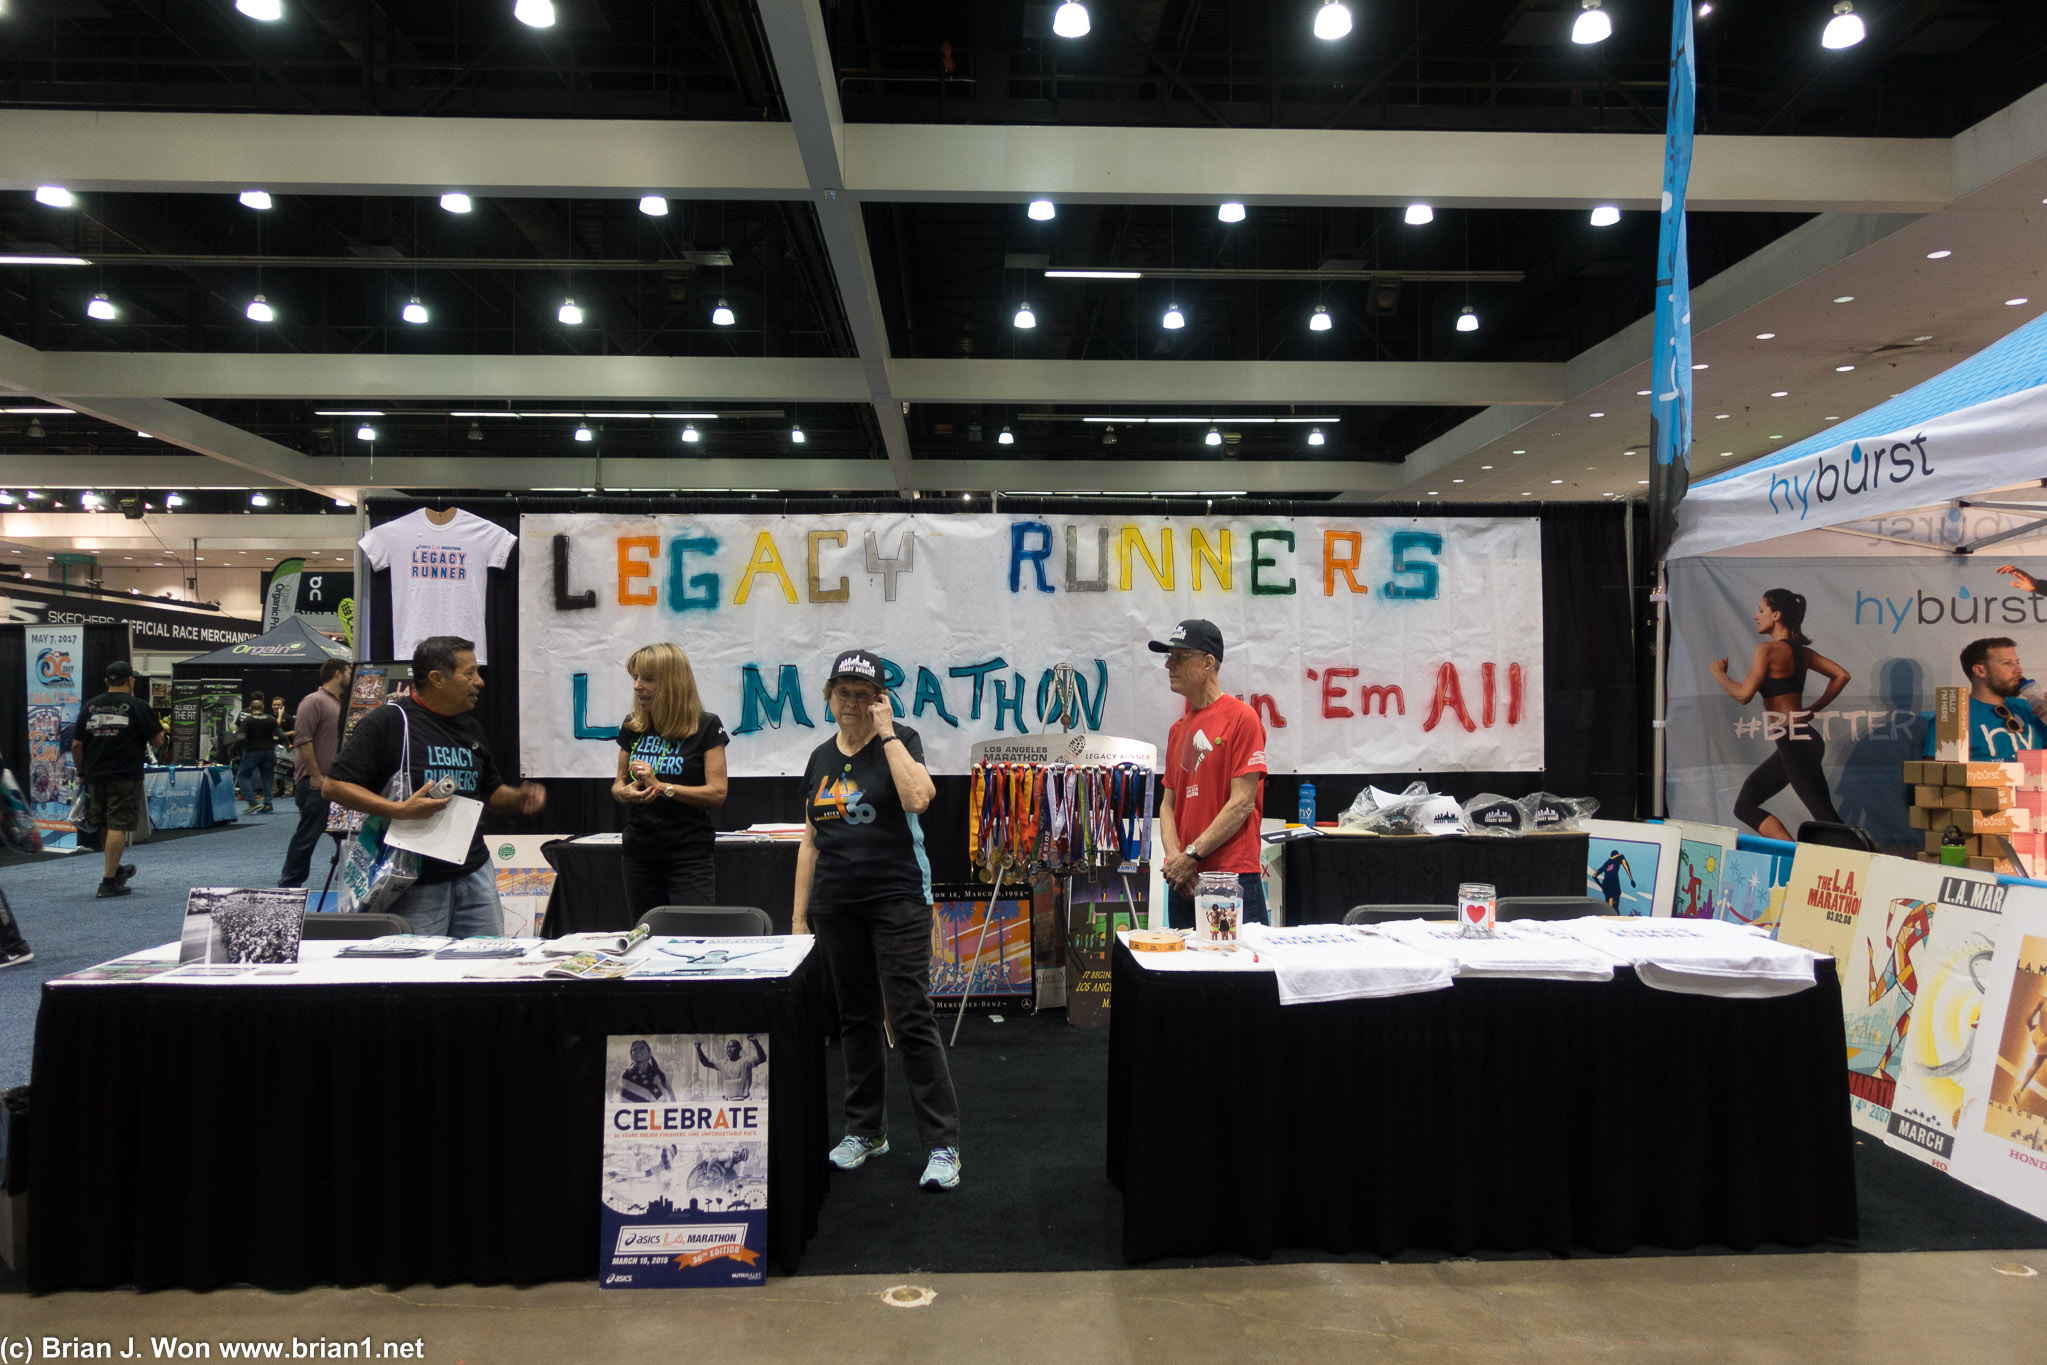 The Legacy Runners booth looks kind of sad.